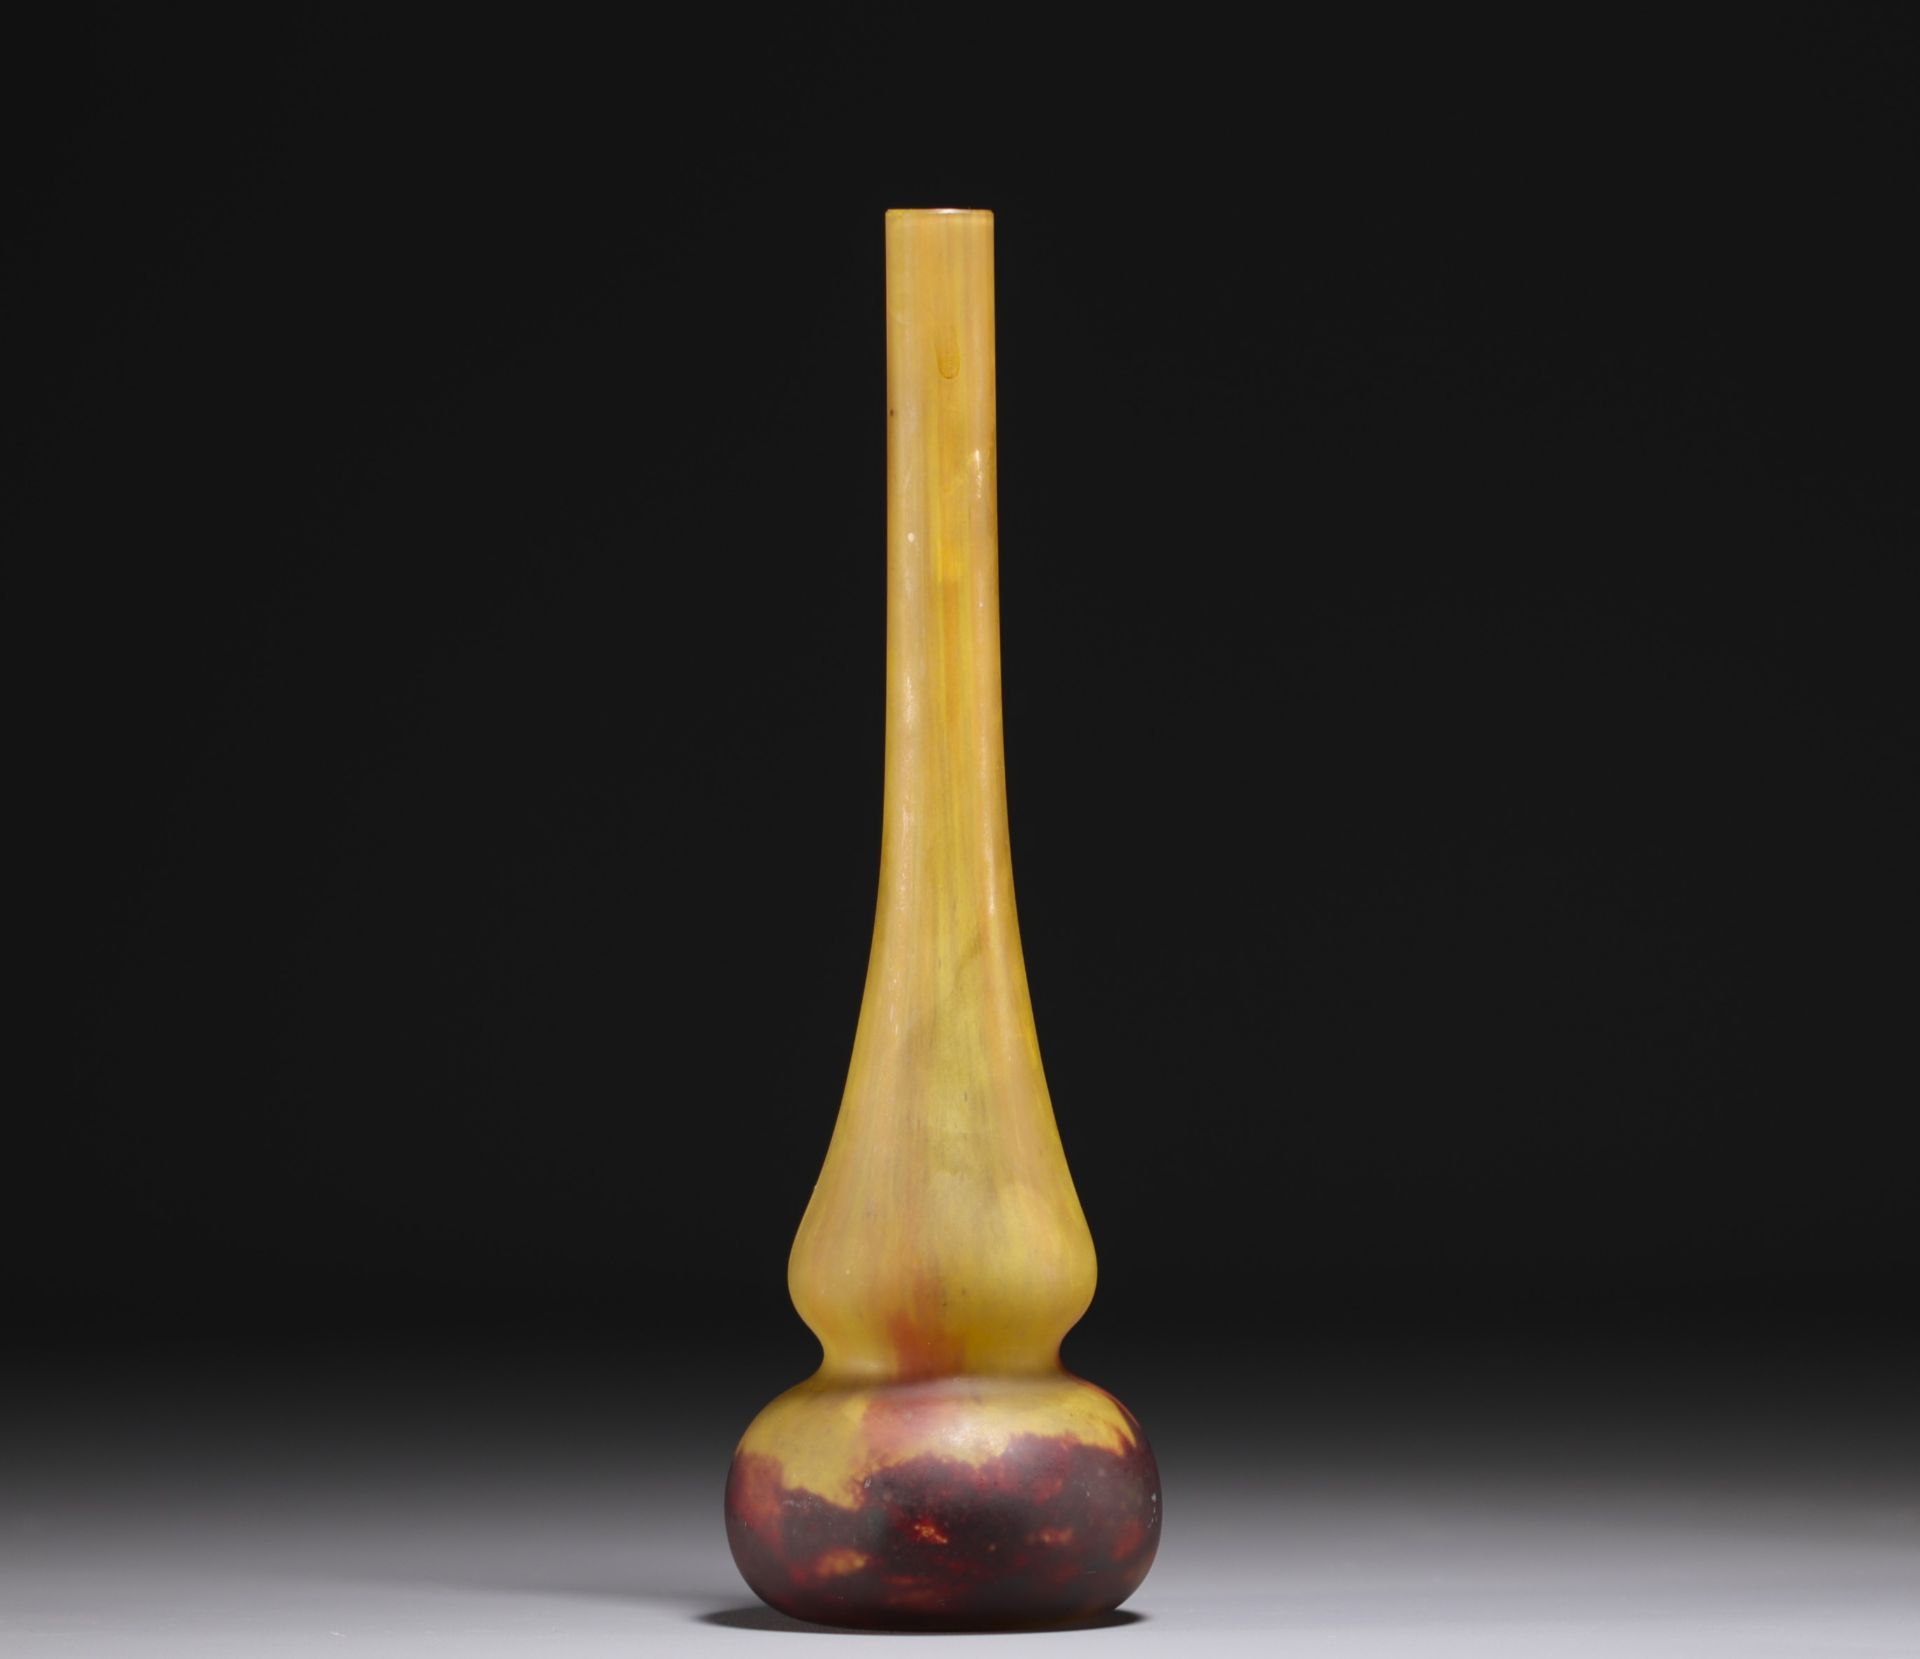 DAUM Nancy - Soliflore vase in shades of yellow and violet, signed. - Image 3 of 3